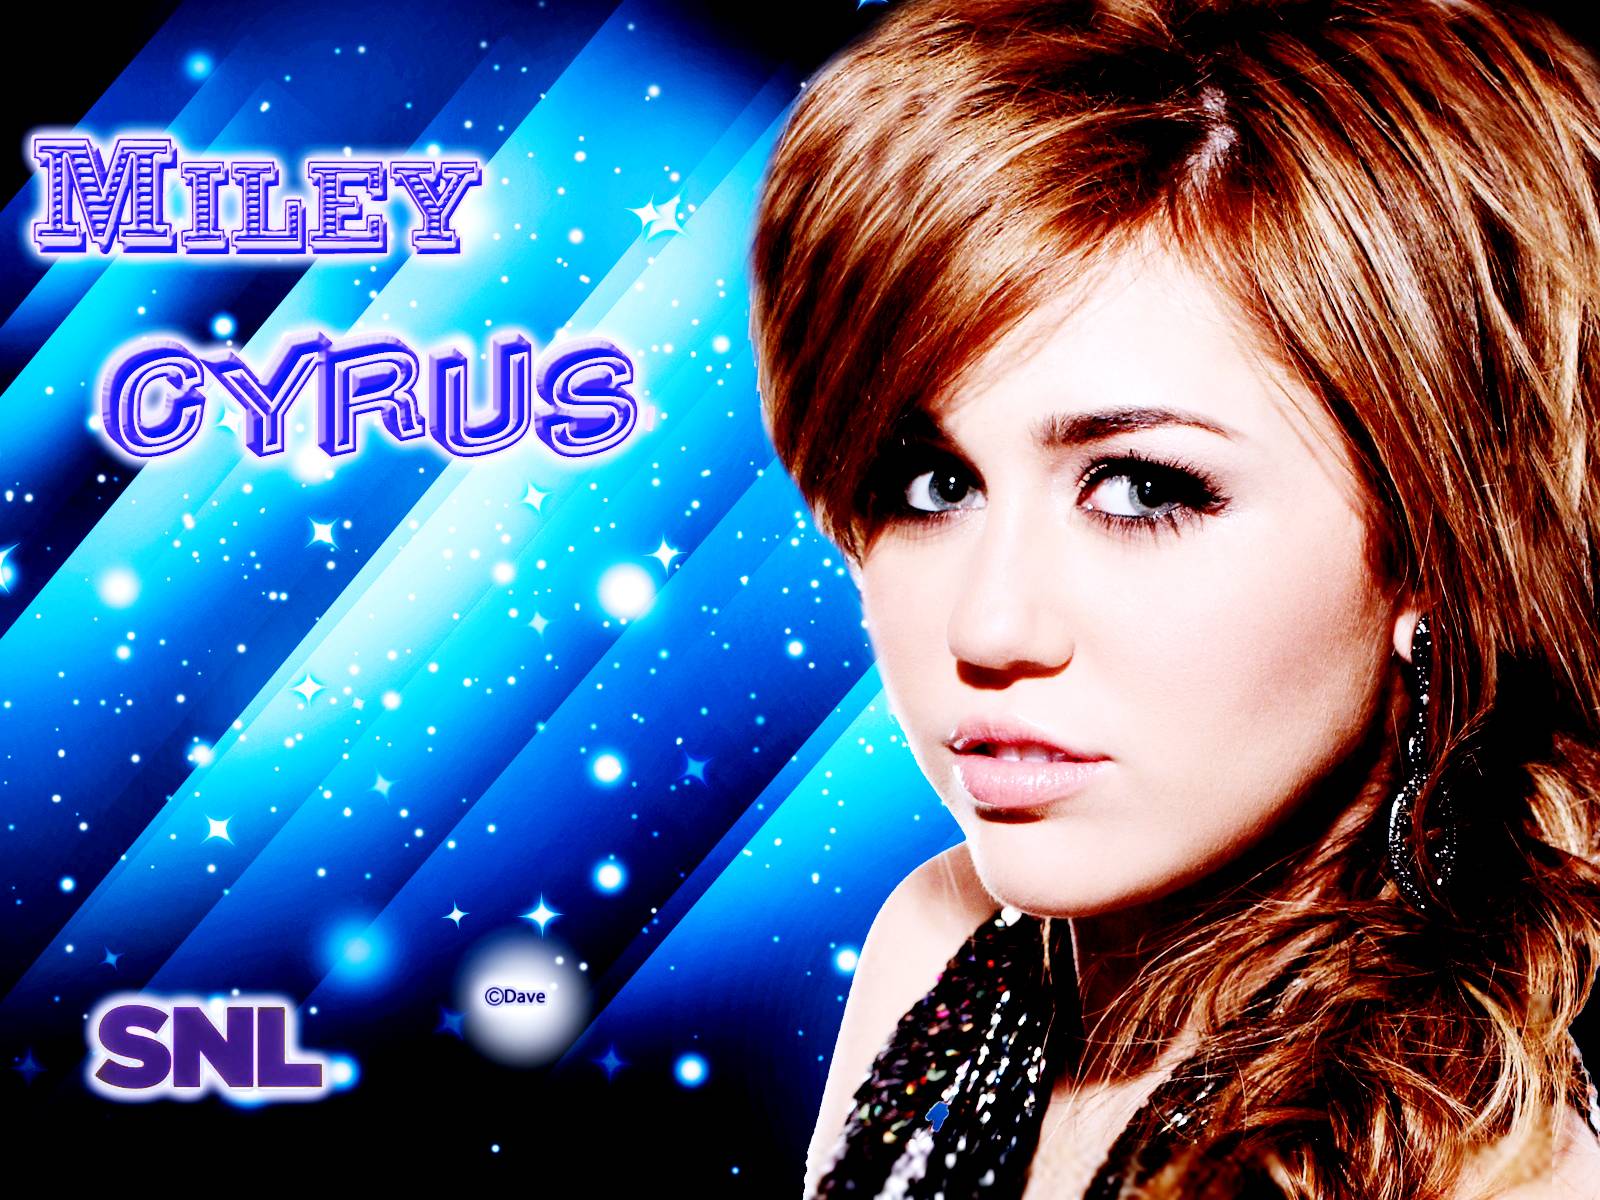 Miley Exclusive Wallpaper by DaVe !!! Cyrus Wallpaper